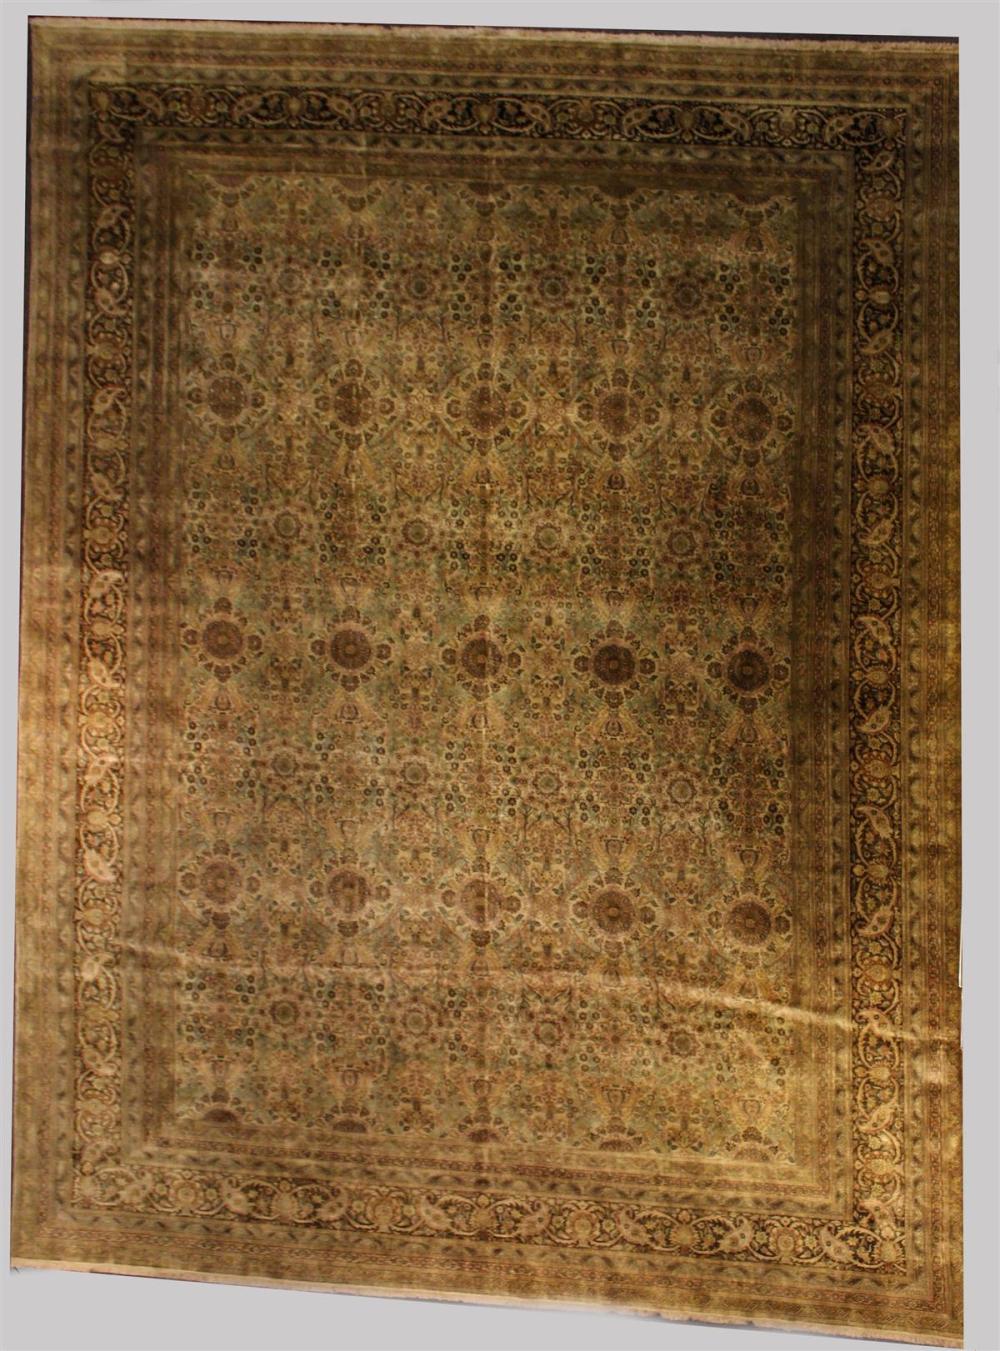 LARGE INDO TABRIZ HAND KNOTTED 33cbca